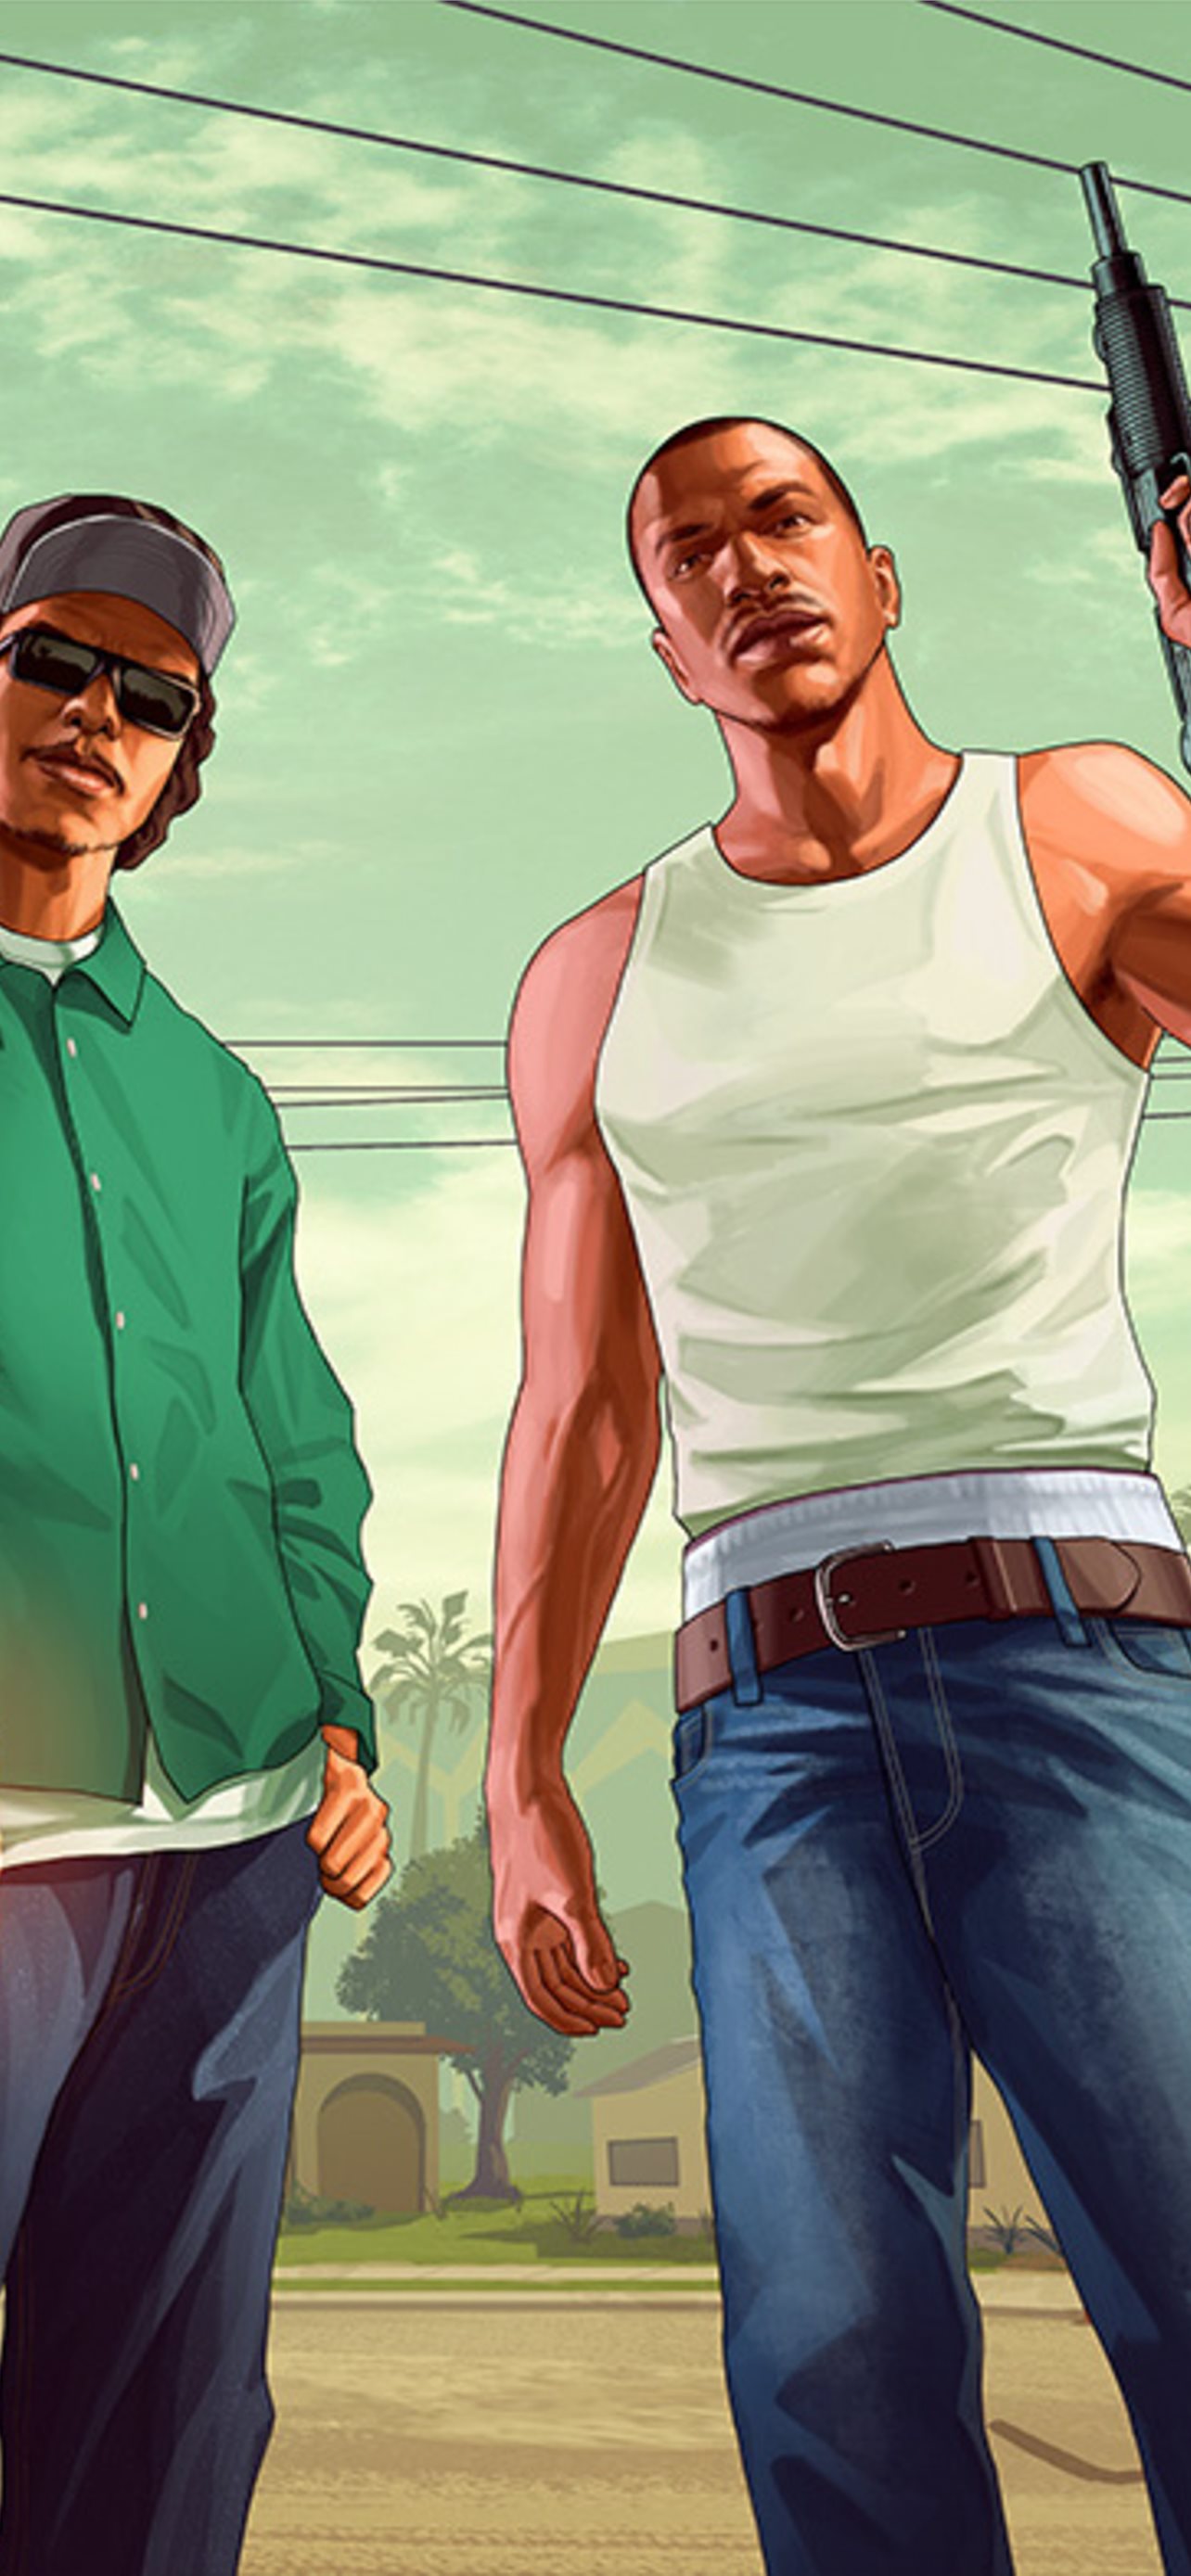 Gta San Andreas WP V9 wallpaper by gymbende  Download on ZEDGE  8ef1